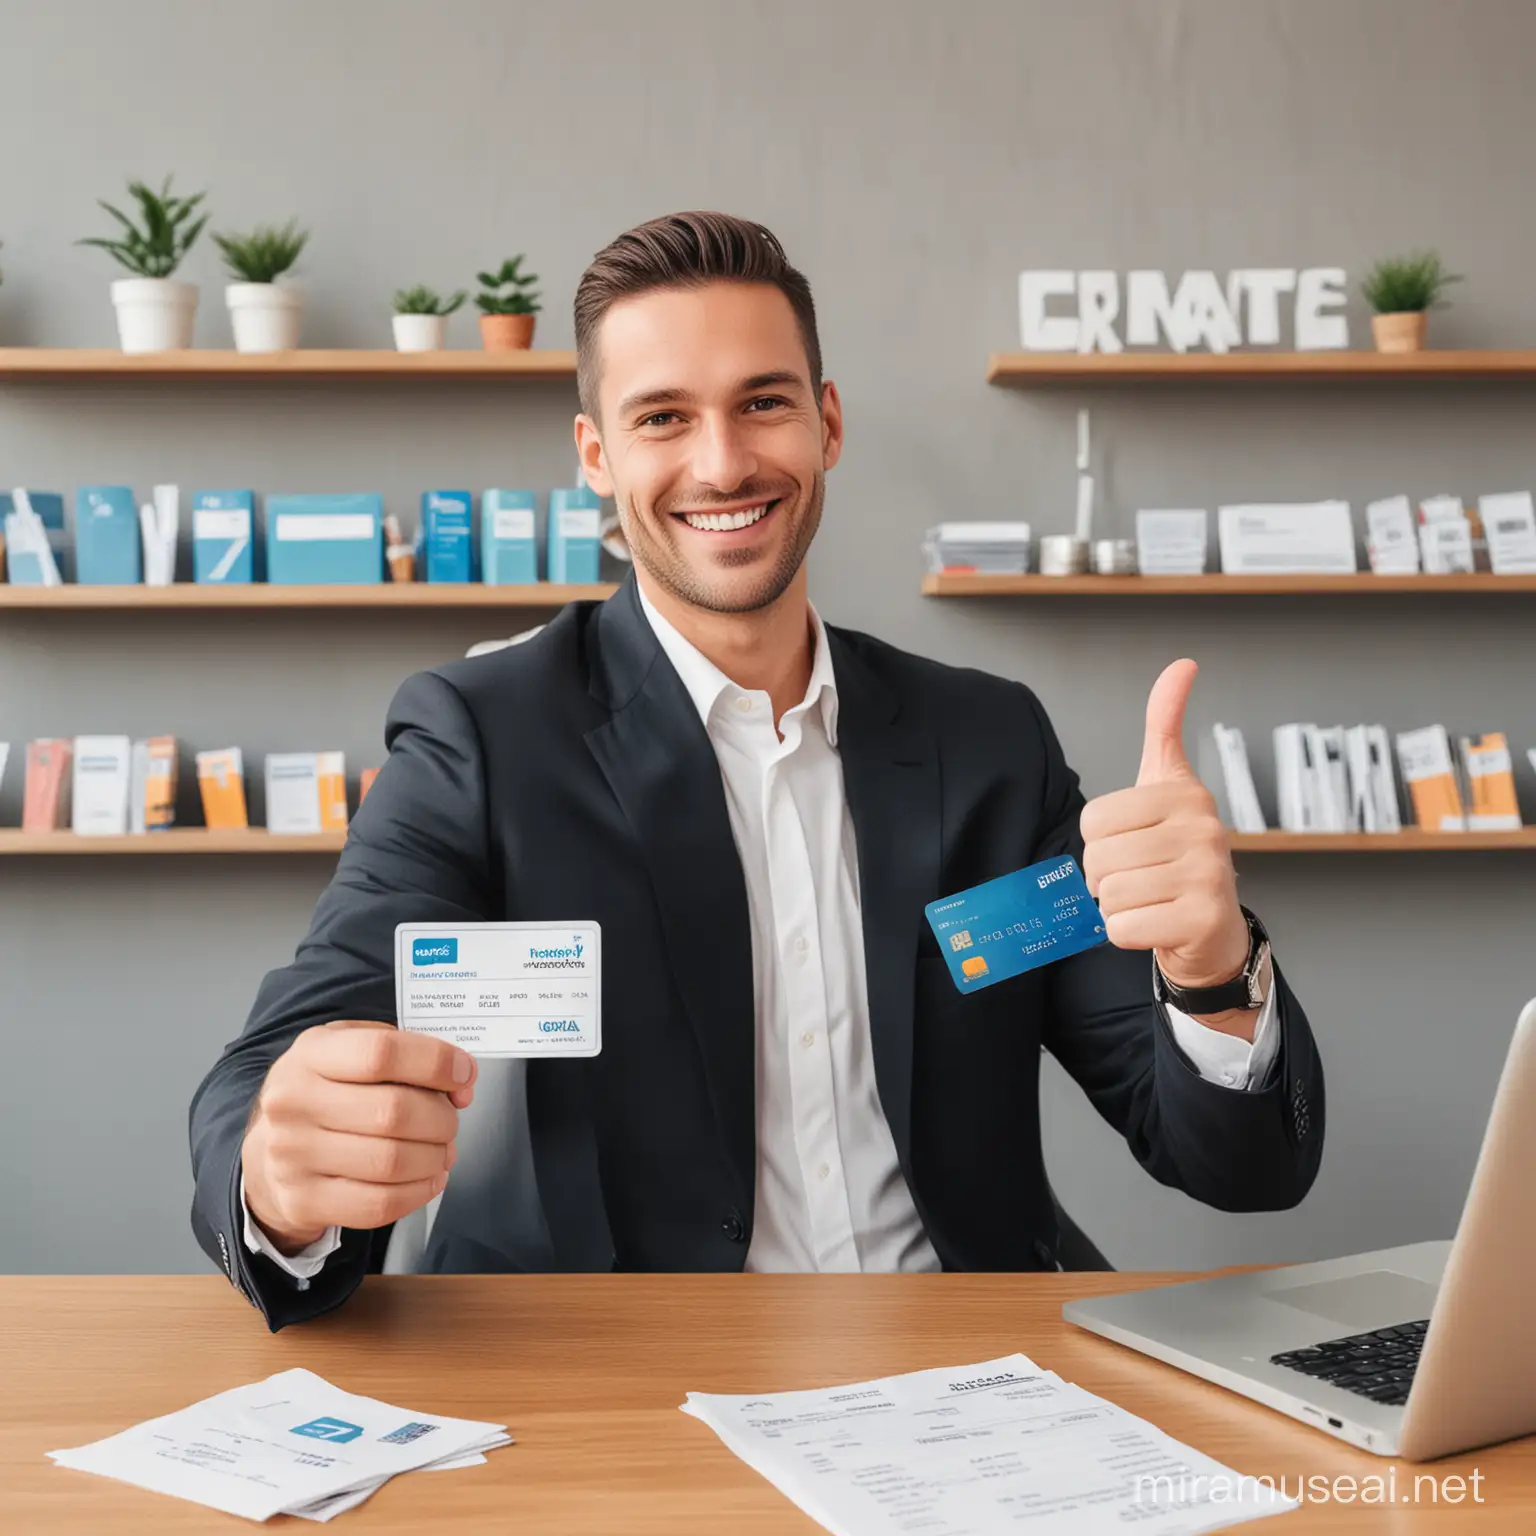 A businessman smiling and giving a thumbs-up while holding a single credit card with the Hedgewiz logo on it. Behind him, a stack of invoices fades into the background, symbolizing the transition to simplified billing